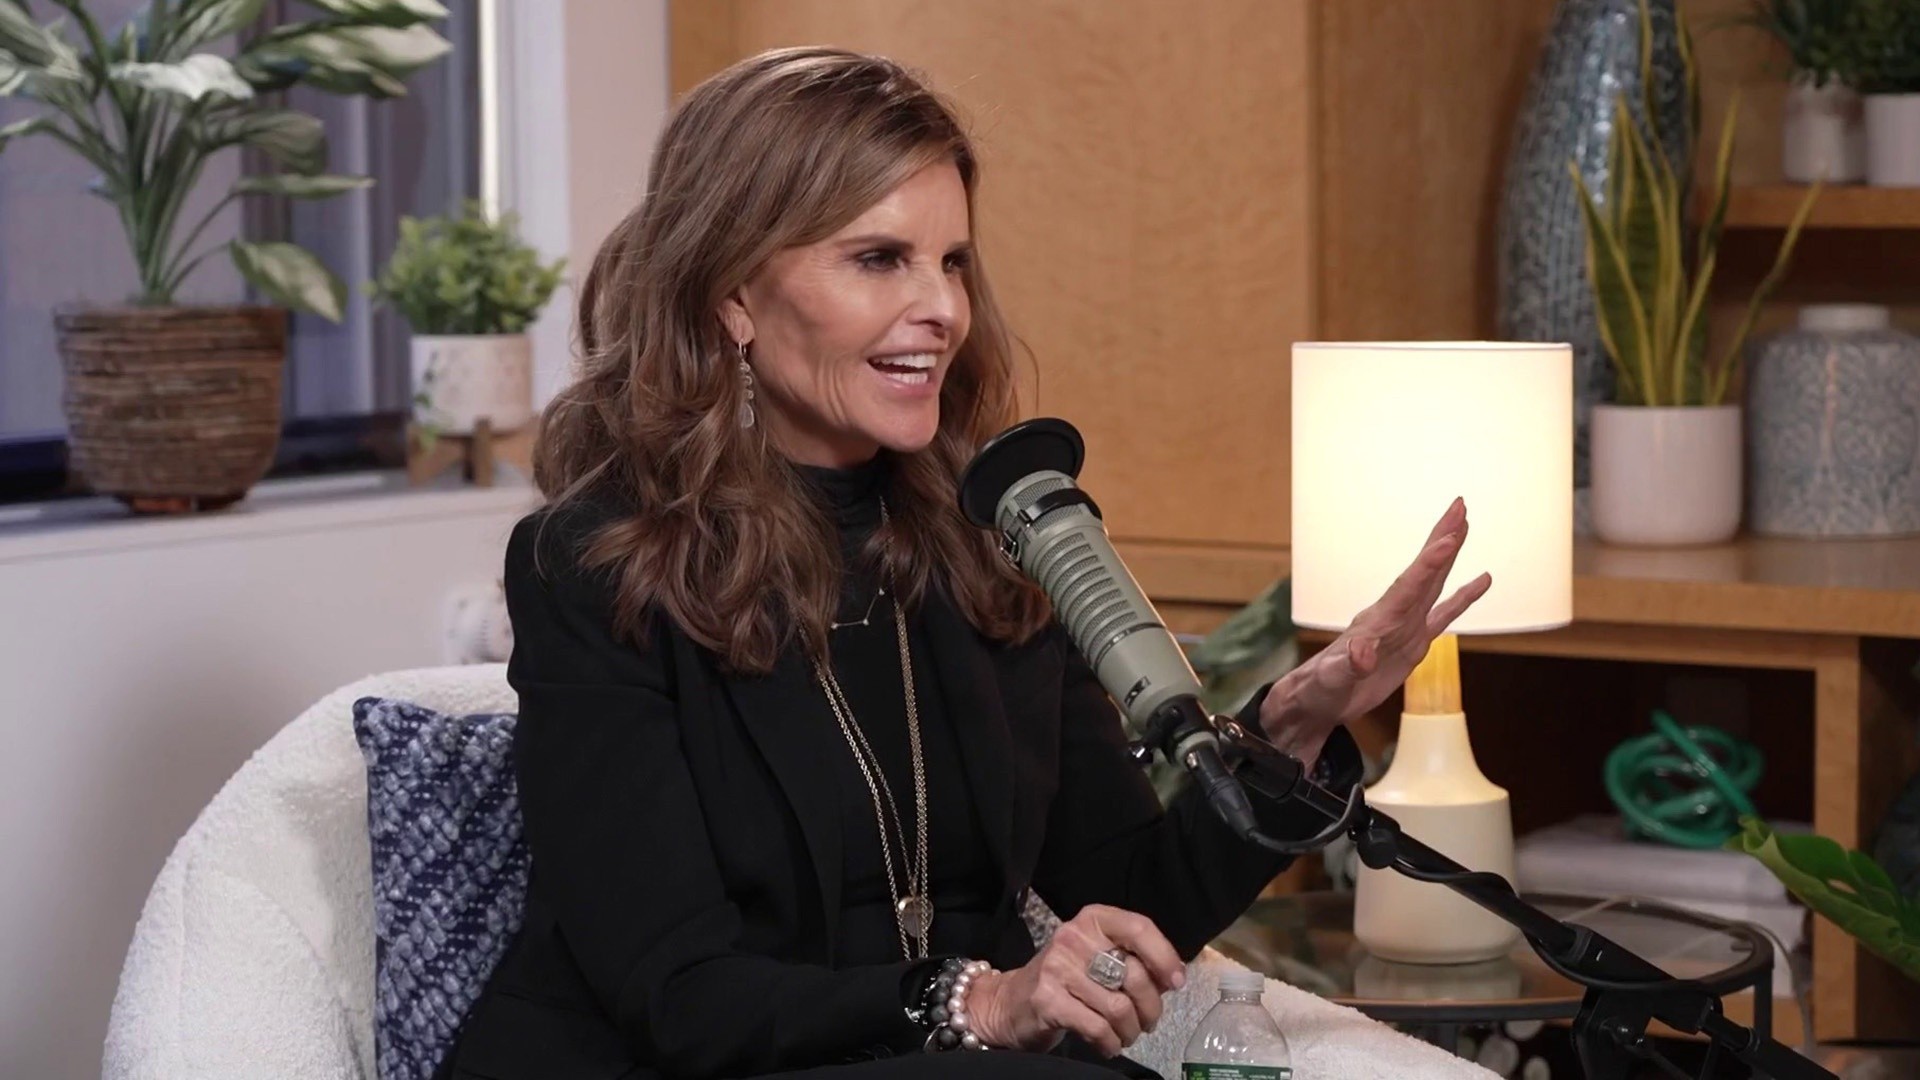 Maria Shriver opens up on importance of slowing down in life